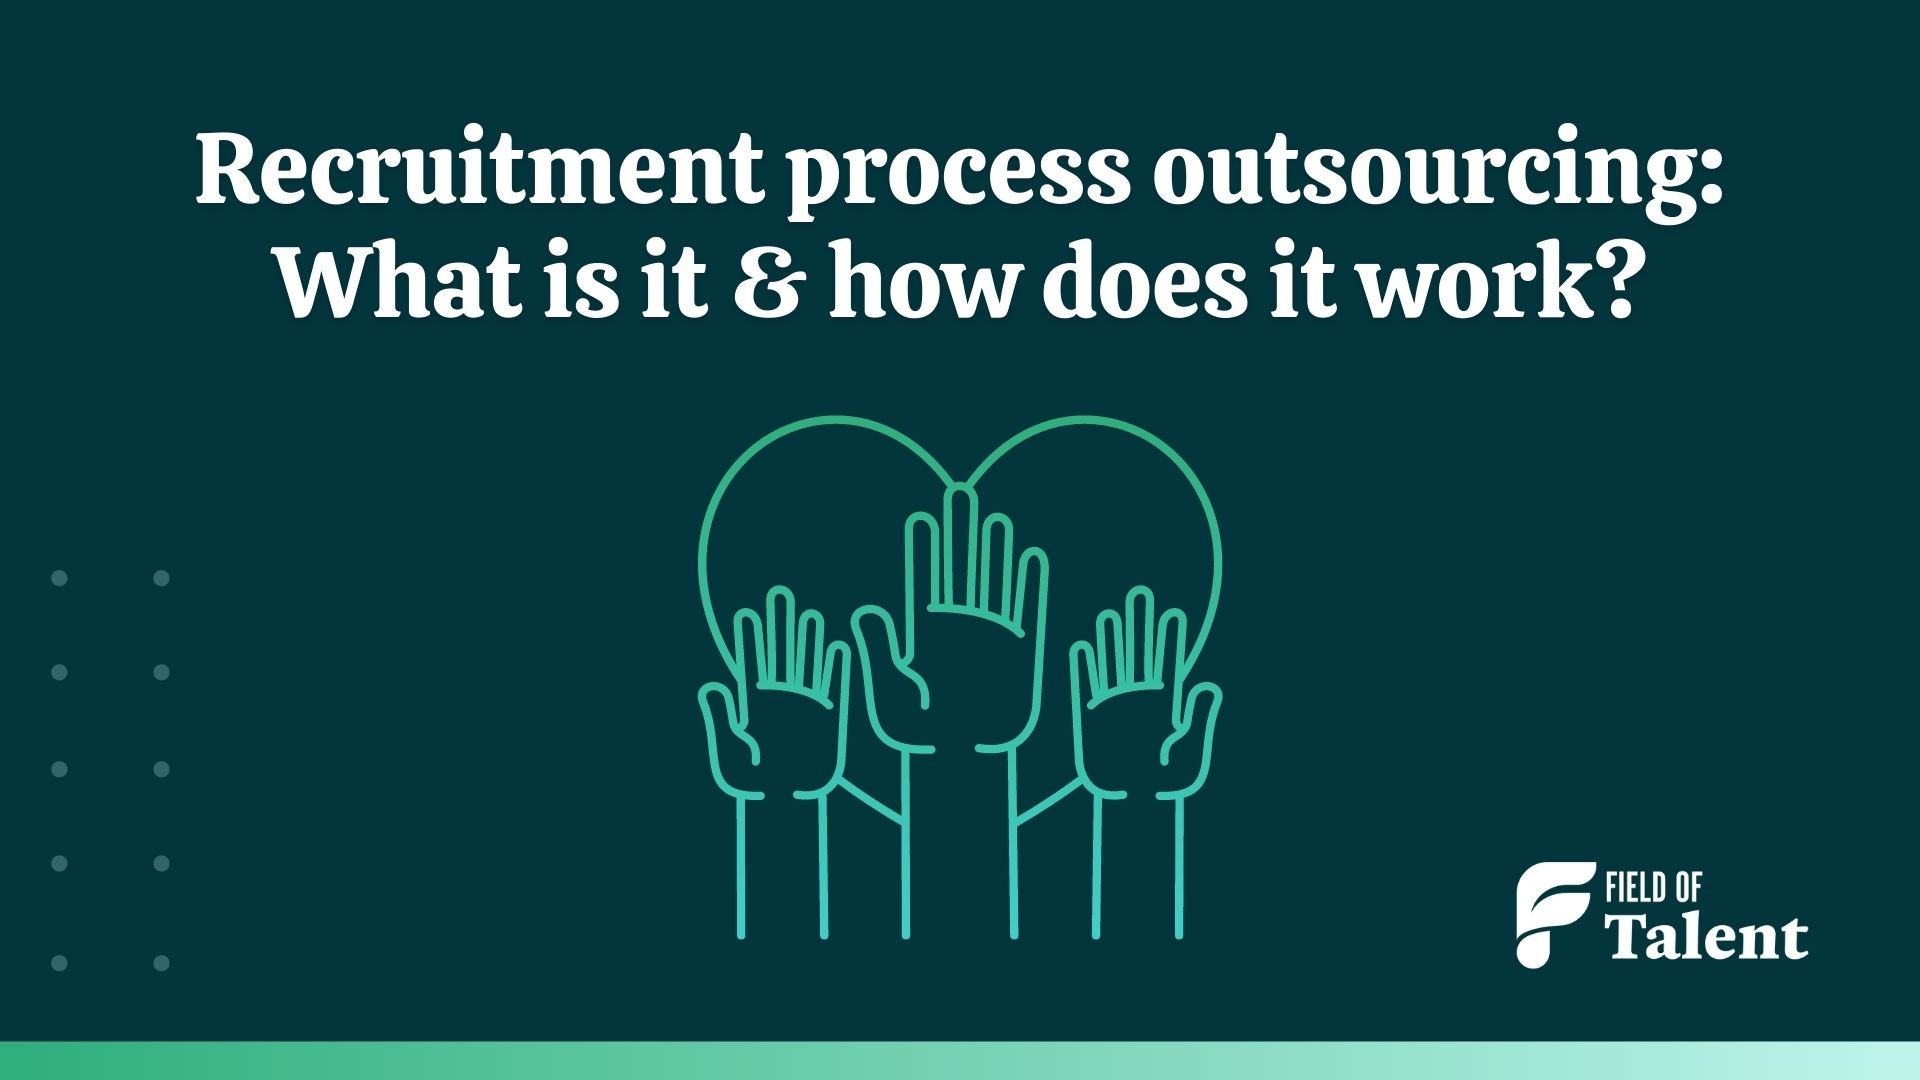 Recruitment process outsourcing: What is it & how does it work?